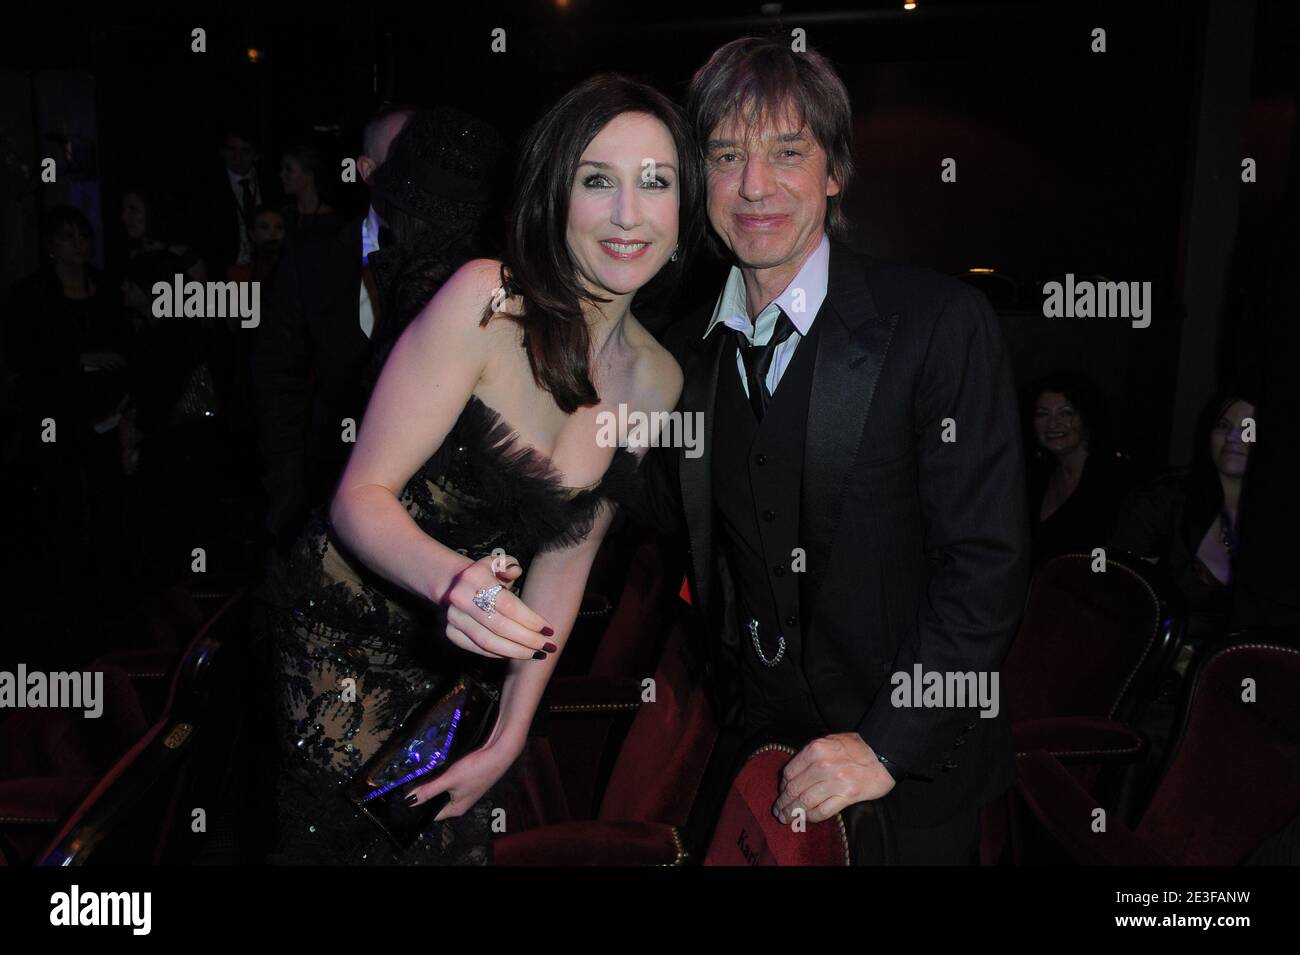 Elsa Zylberstein and Jean-Louis Aubert during the 34th Cesar ceremony ( French cinema awards) held at the Theatre du Chatelet in Paris, France on February 27, 2009. Photo by Guignebourg-Nebinger/ABACAPRESS.COM Stock Photo